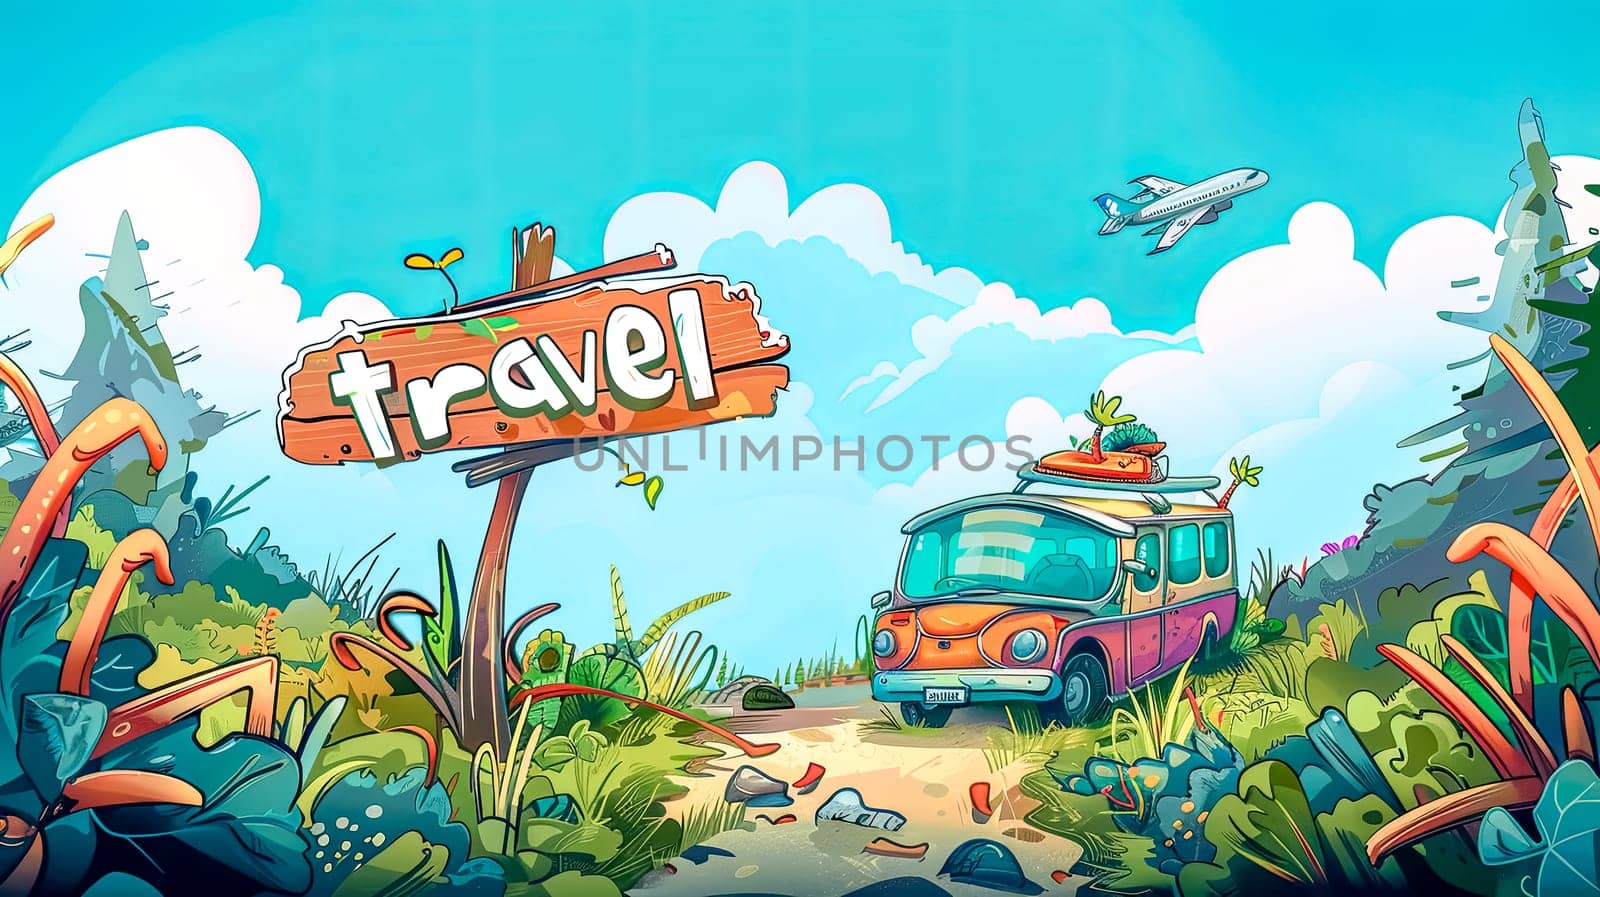 Vibrant cartoon of a travel van on a scenic road trip with a 'travel' signpost and airplane